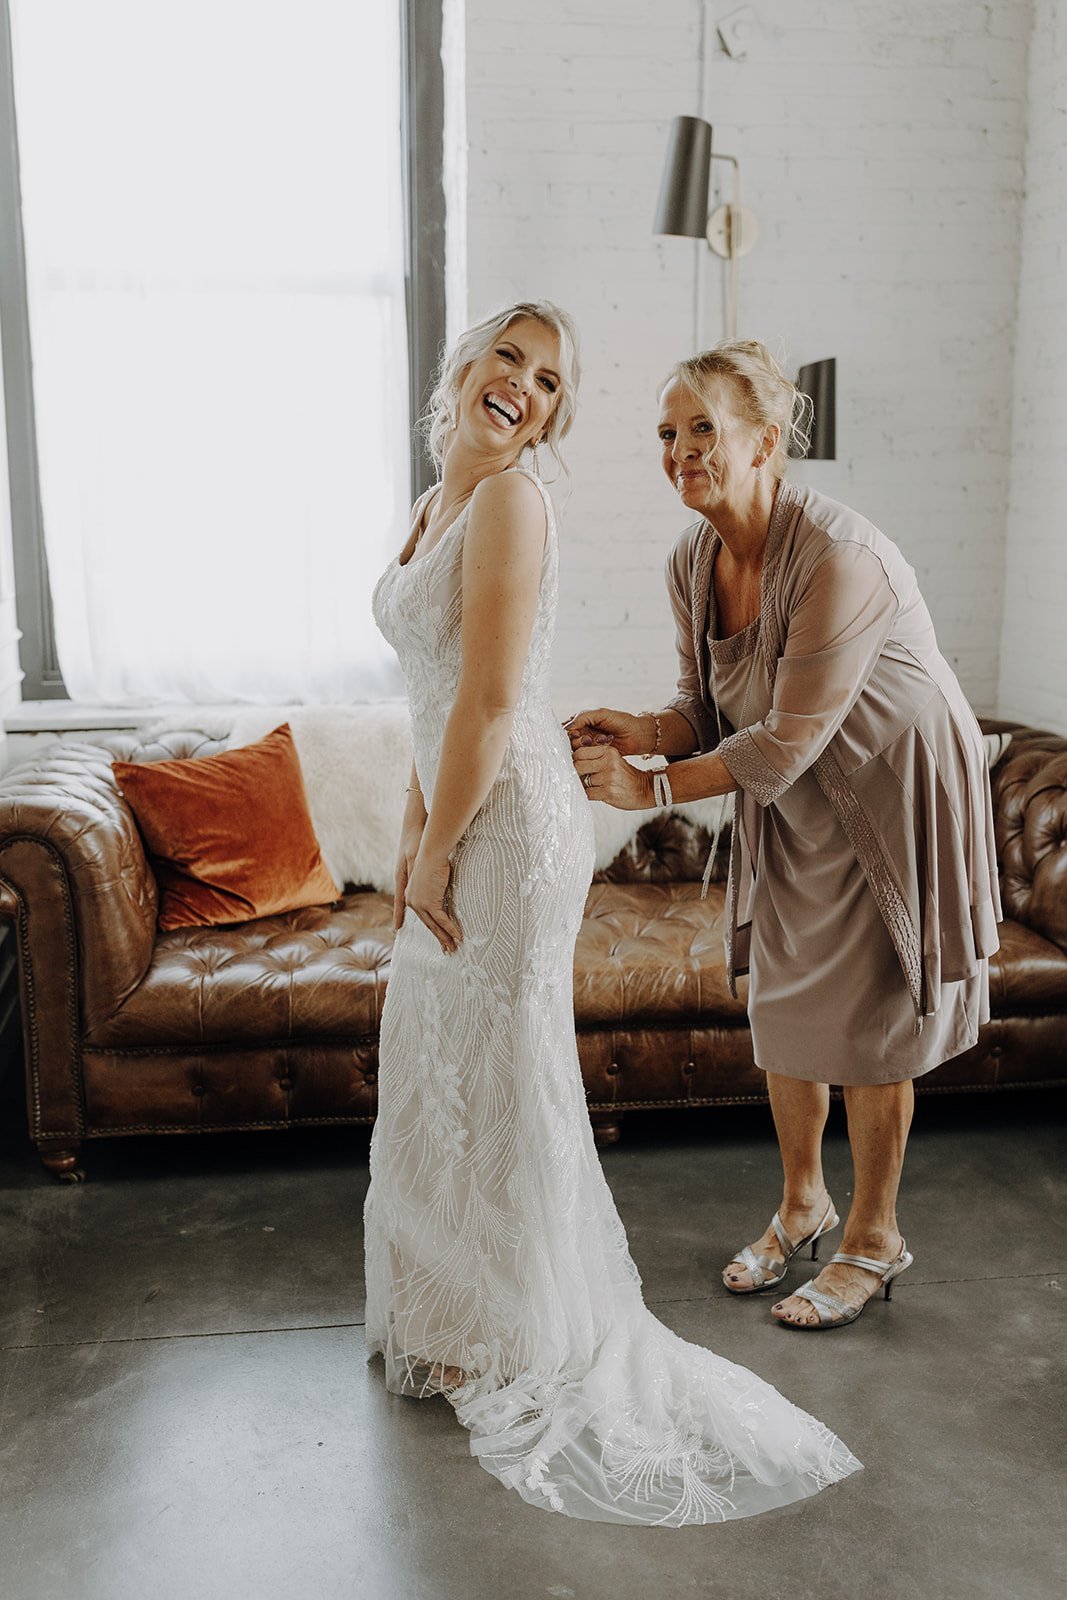 Bride and mother zipping up wedding dress while getting ready